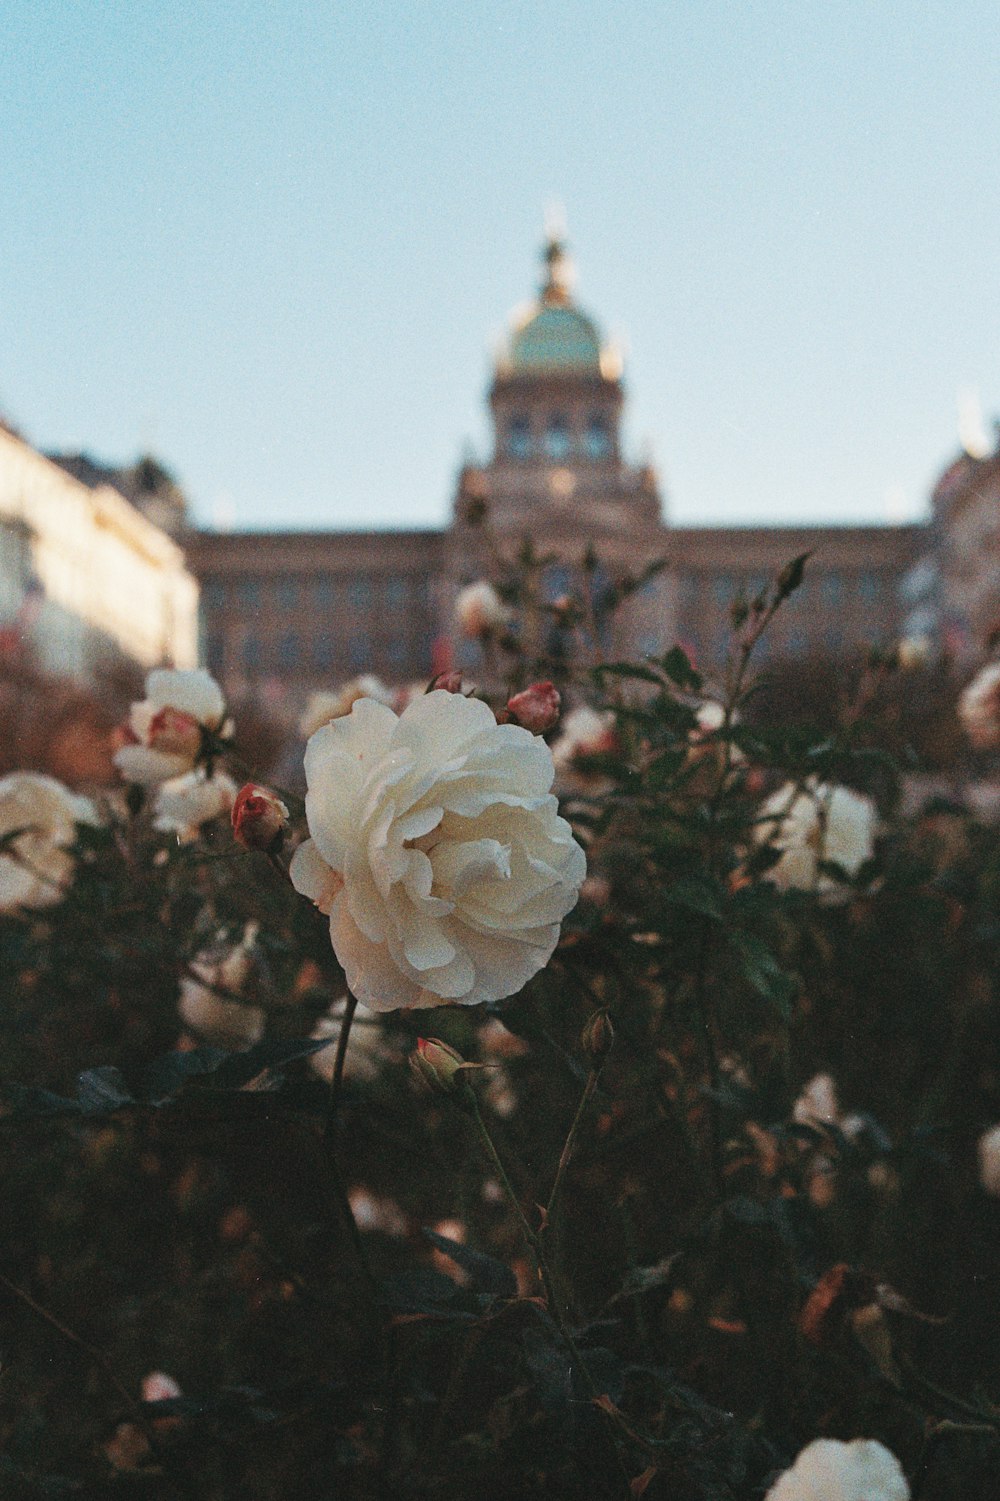 a white rose in front of a building